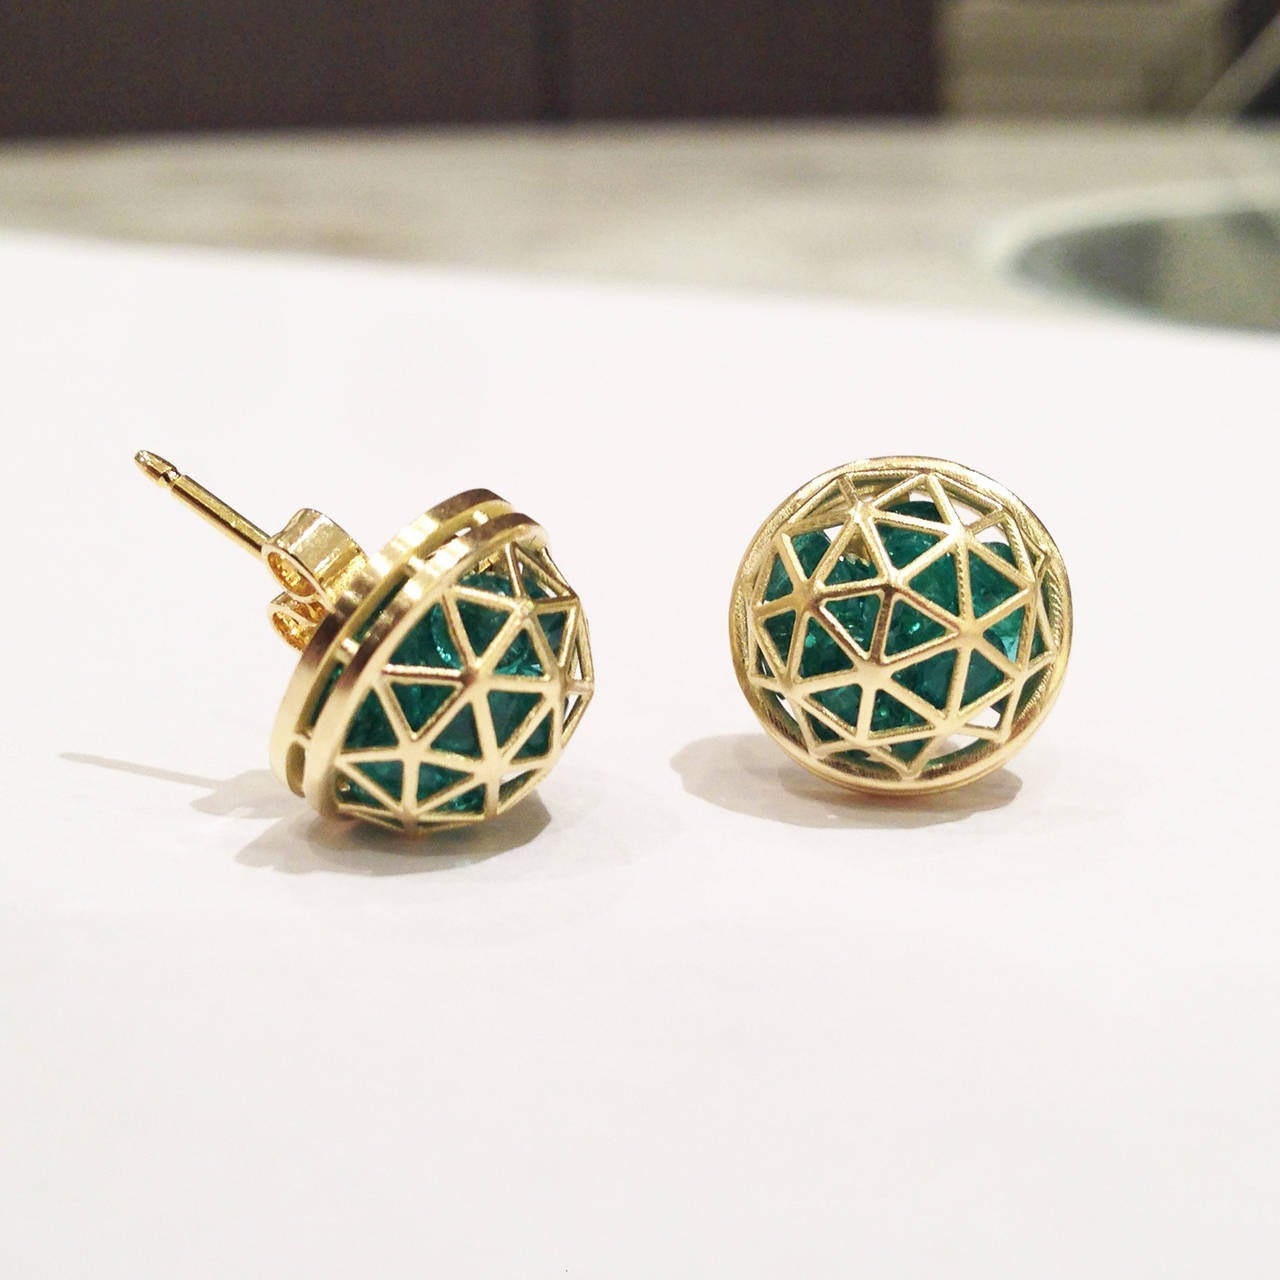 Shaker Dome Earrings crafted in 18k yellow gold with 5.58 total carats of loose emerald gemstones.